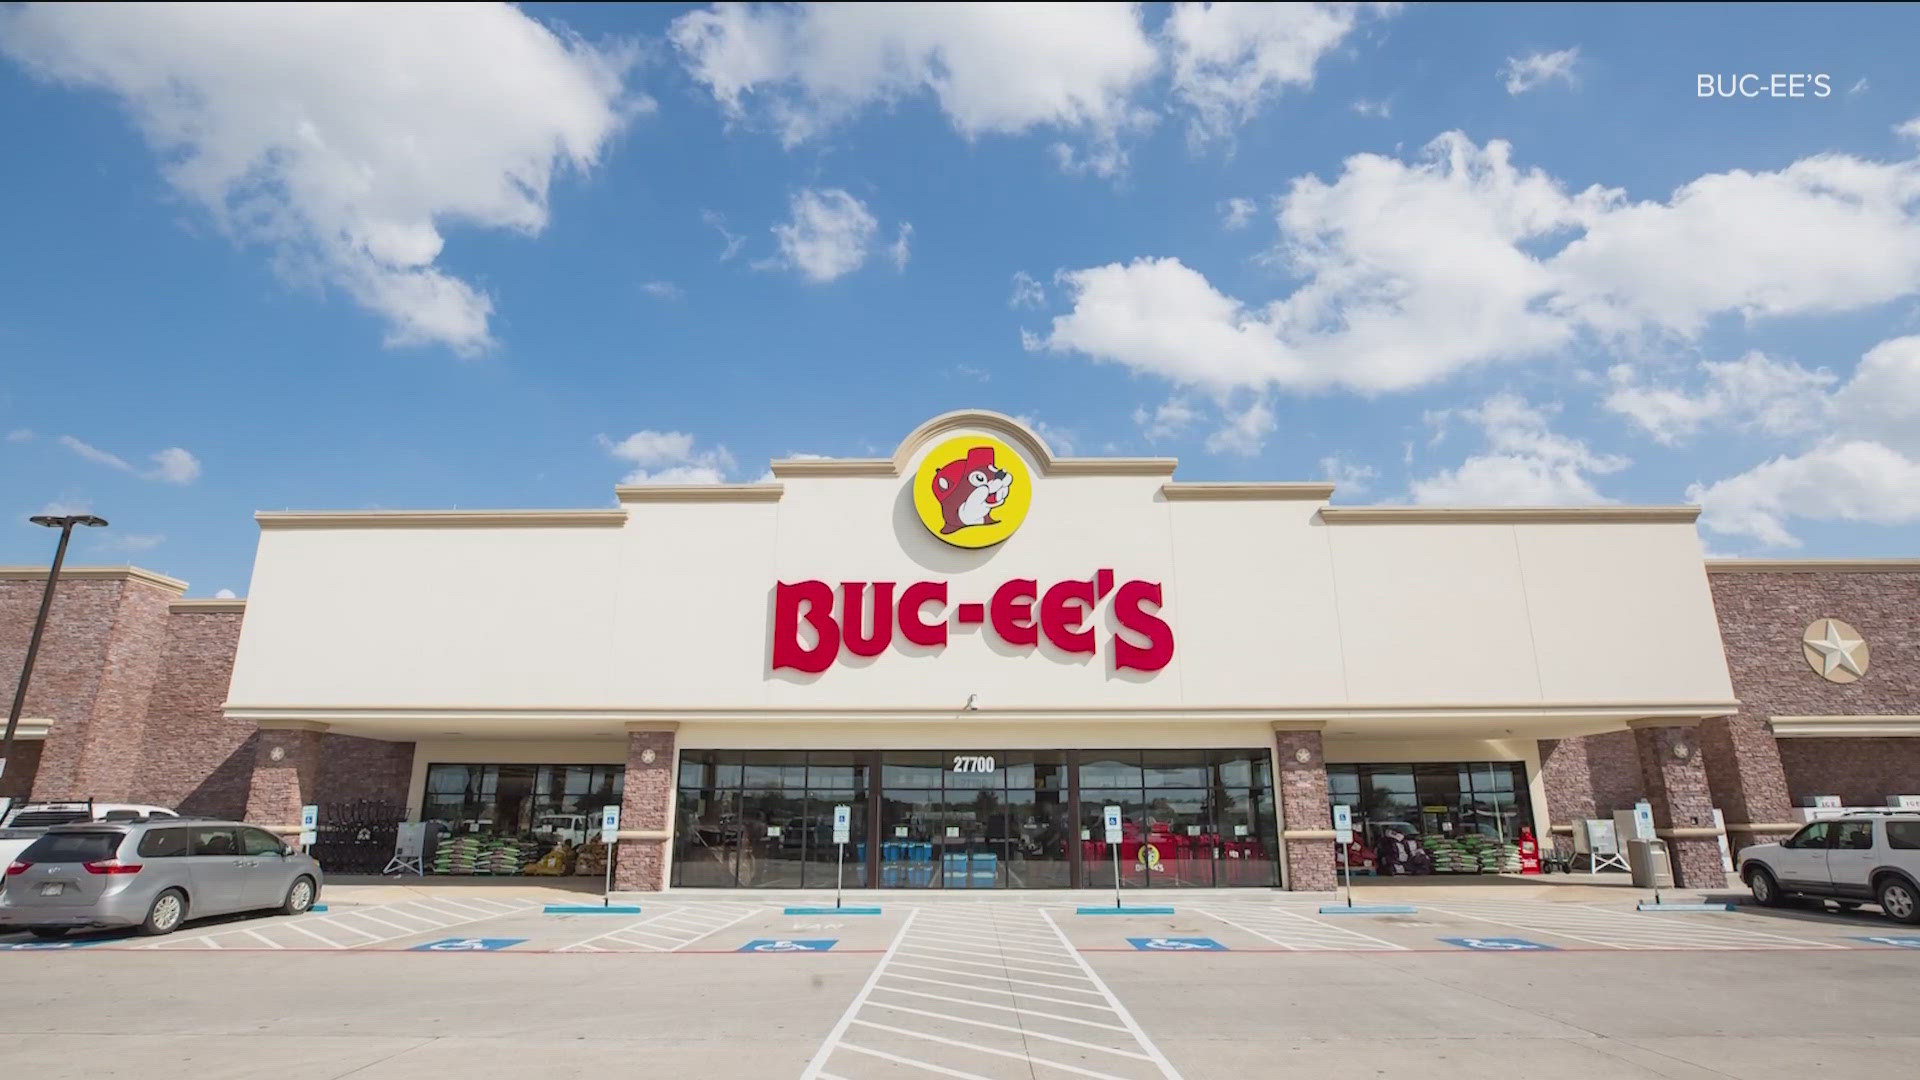 A new Buc-ee's could be coming to San Marcos. The San Marcos City Council will consider a tax incentive for the gas station chain.